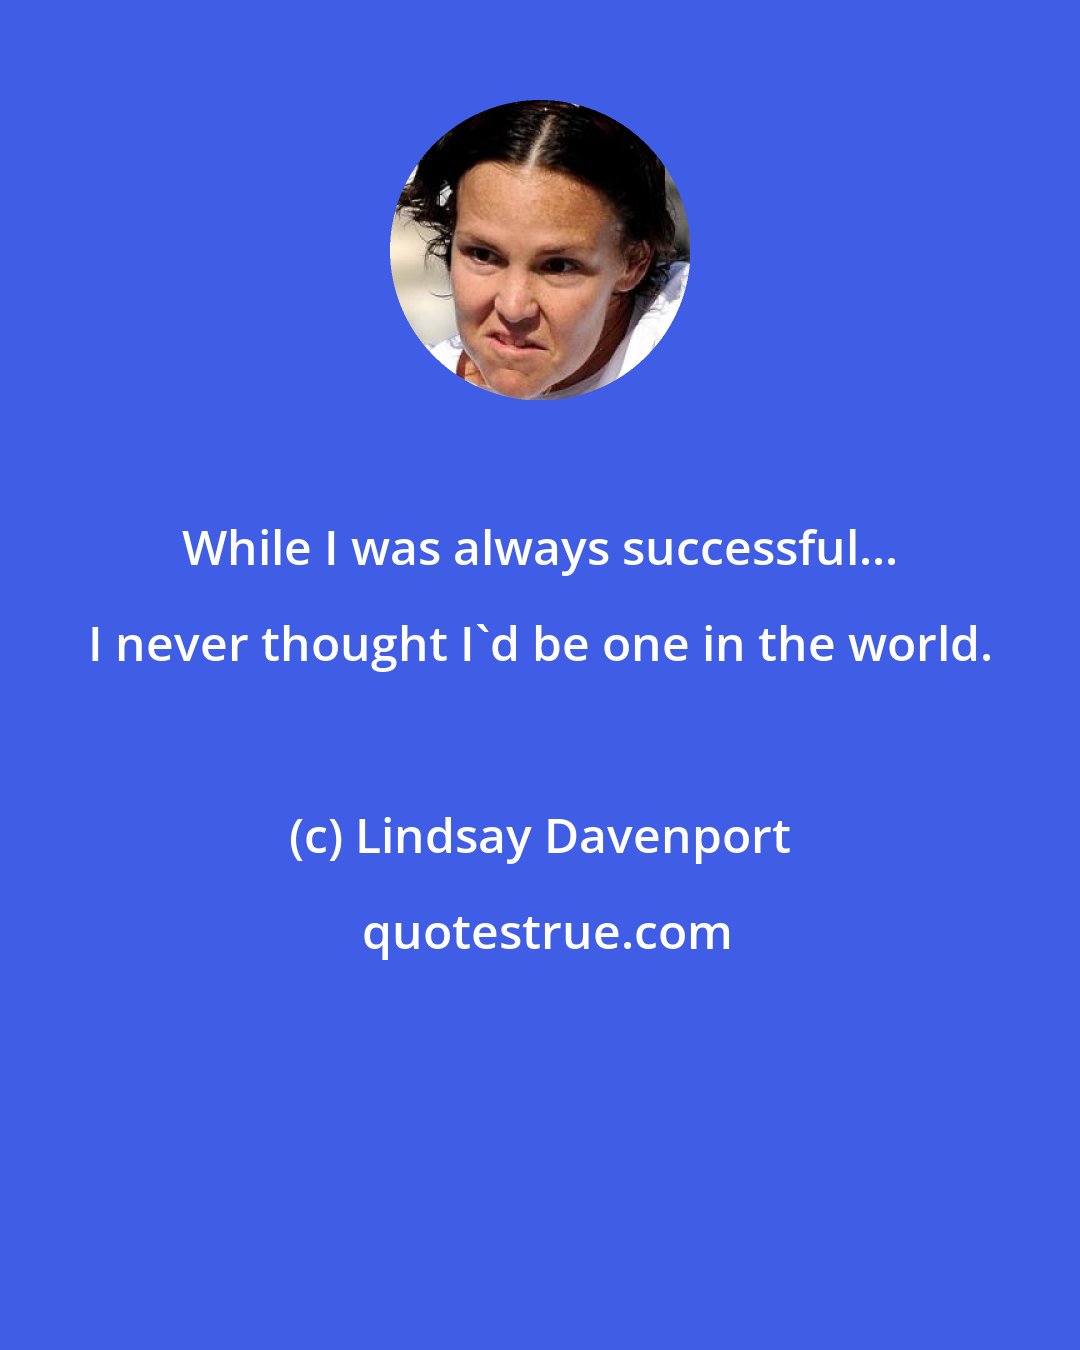 Lindsay Davenport: While I was always successful... I never thought I'd be one in the world.